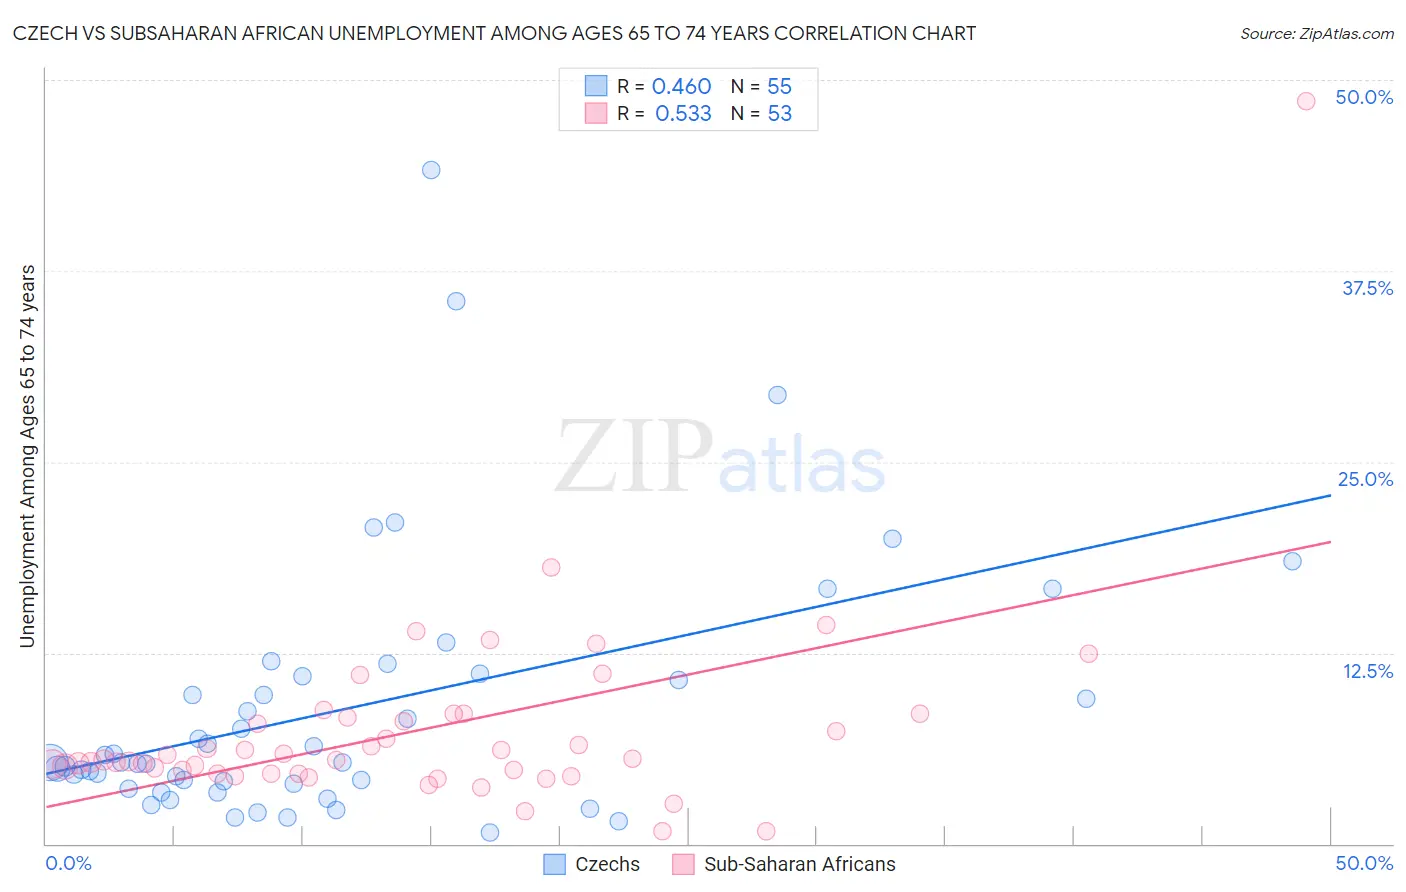 Czech vs Subsaharan African Unemployment Among Ages 65 to 74 years